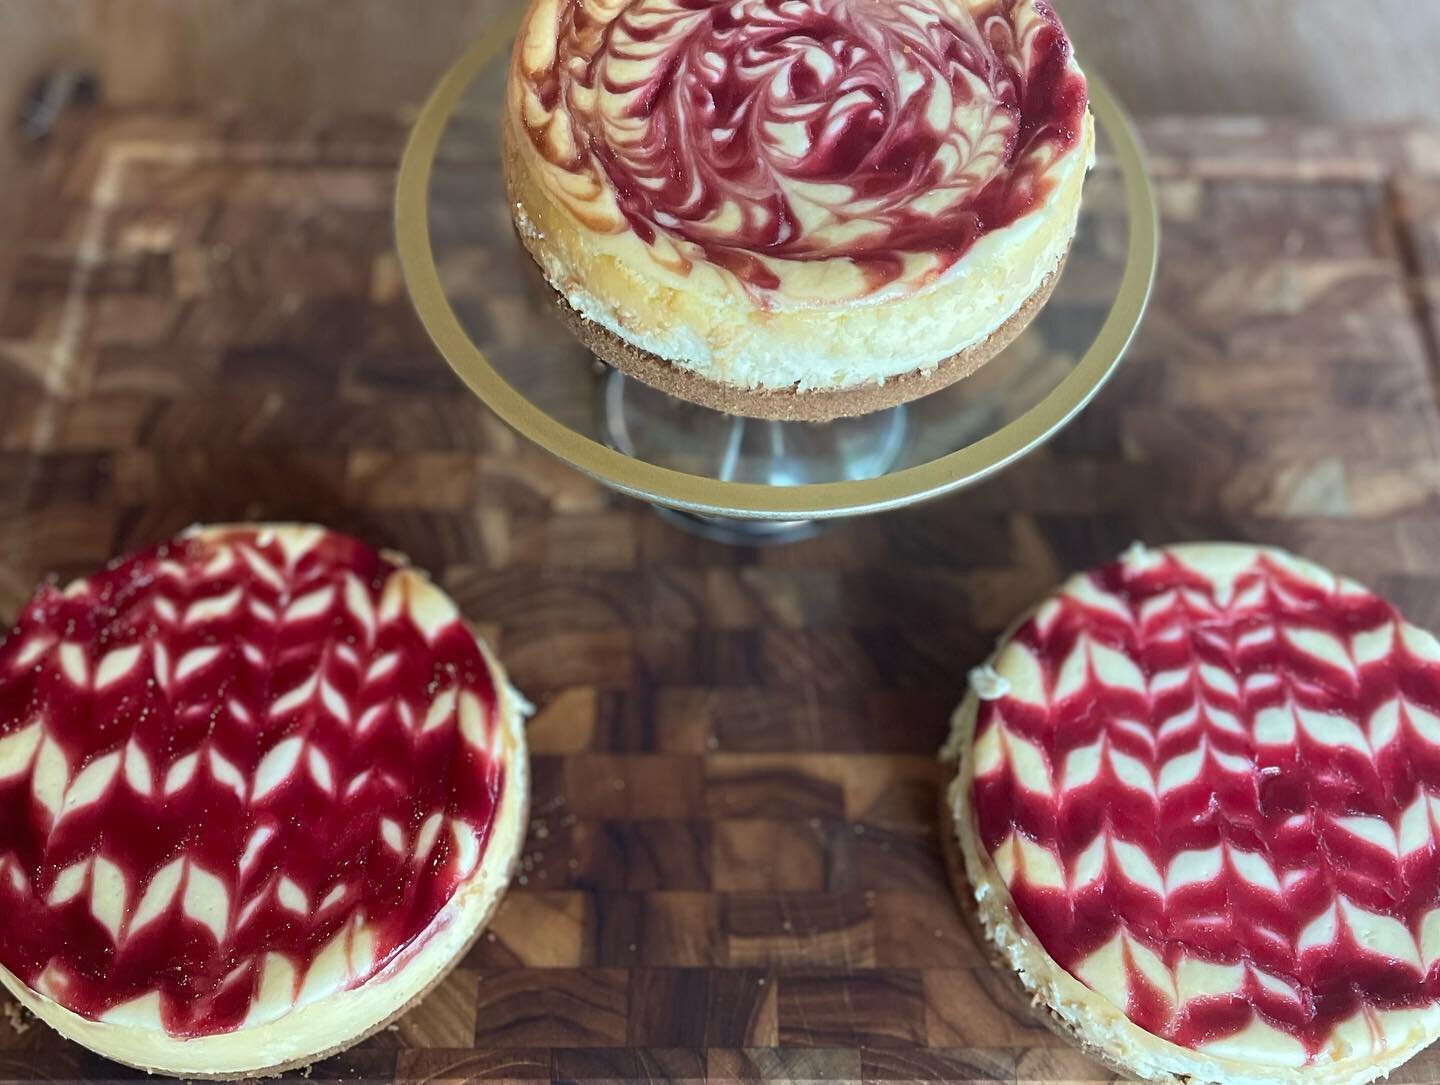 Mothers Day is right around the corner and your lady deserves cheesecake! Feat. Our 6&rdquo; Raspberry Lemon Cheesecake. 6&rdquo; cheesecakes are available in all flavors, check them out at topknotartisanbakery.com !

Mother&rsquo;s Day special remin